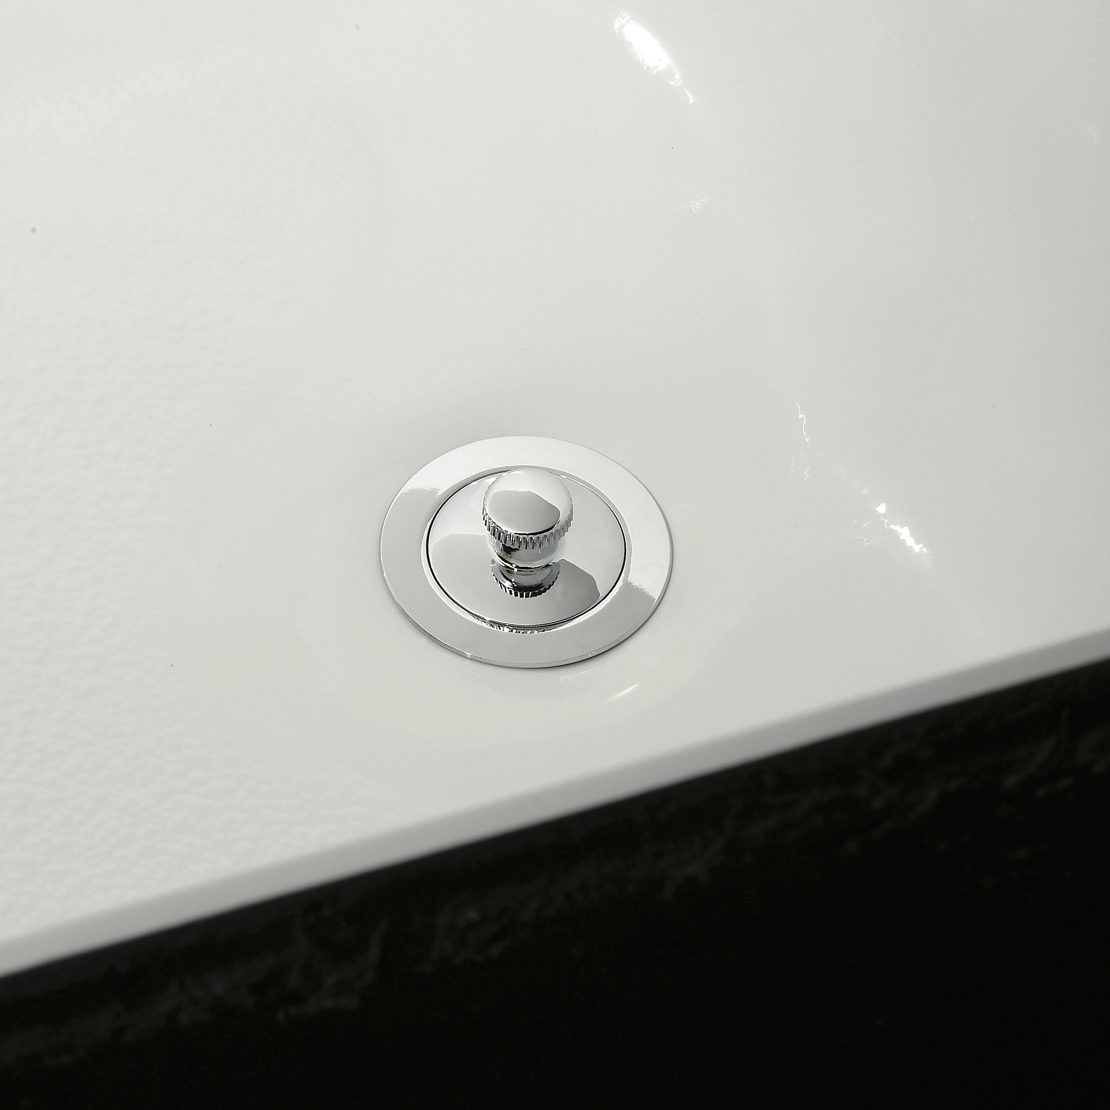 How To Unclog a Bathtub Drain – 5 of the Best Steps to Know